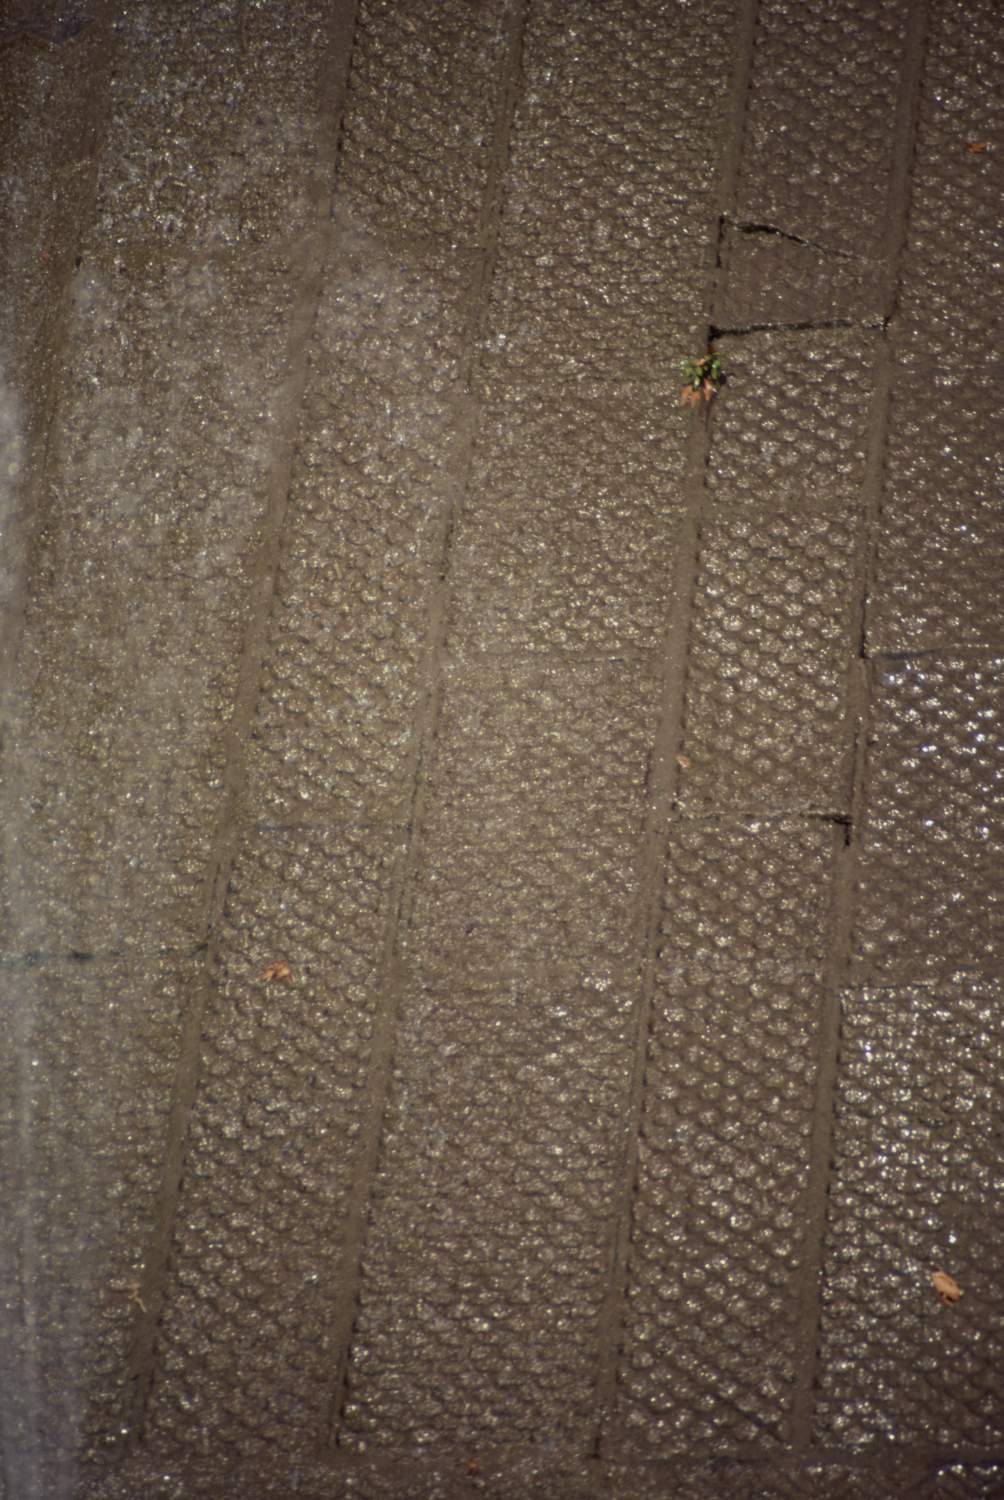 Nishat Bagh - Detail view of carved pattern on a water chute (<span style="font-style: italic;">chadar</span>).